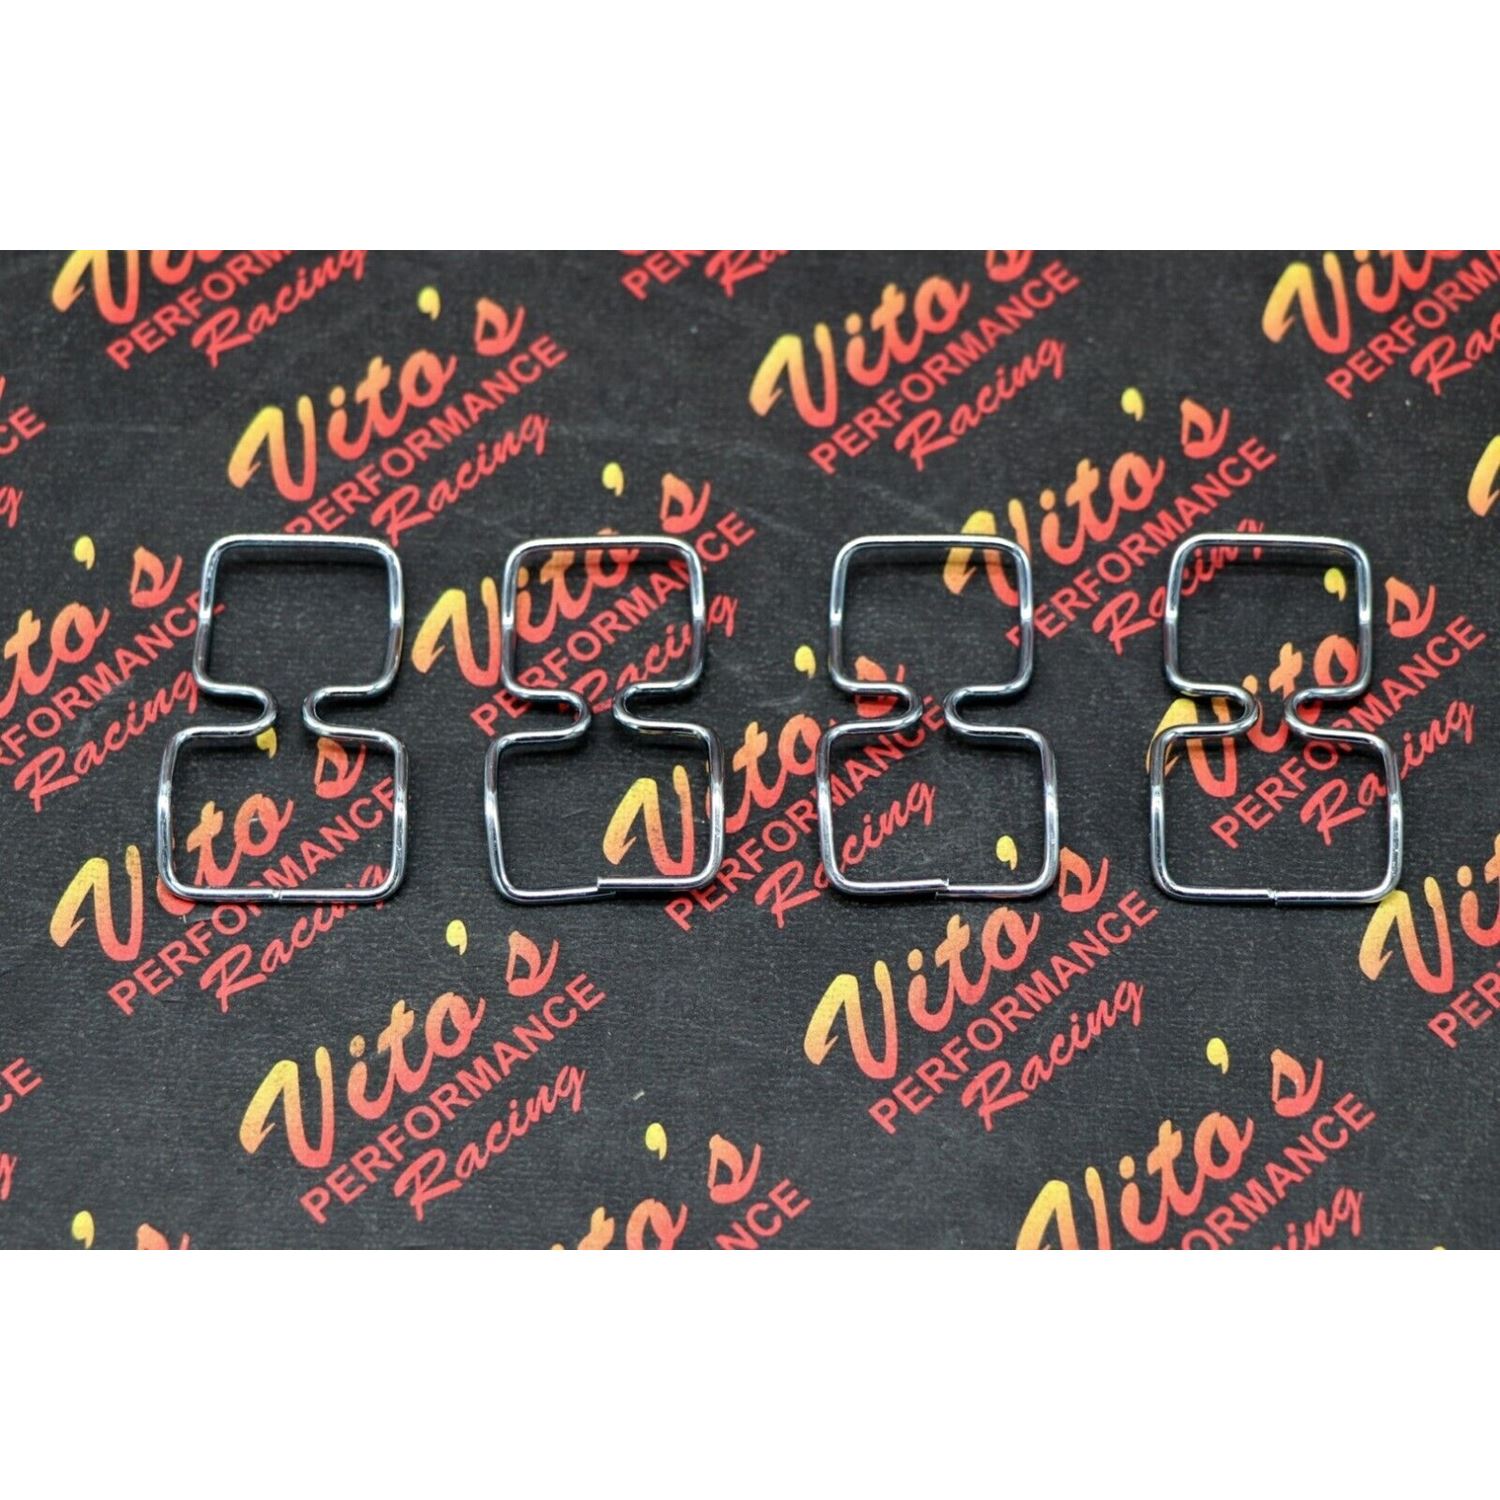 4 x NEW airbox CLIPS for stock factory OEM LID cla